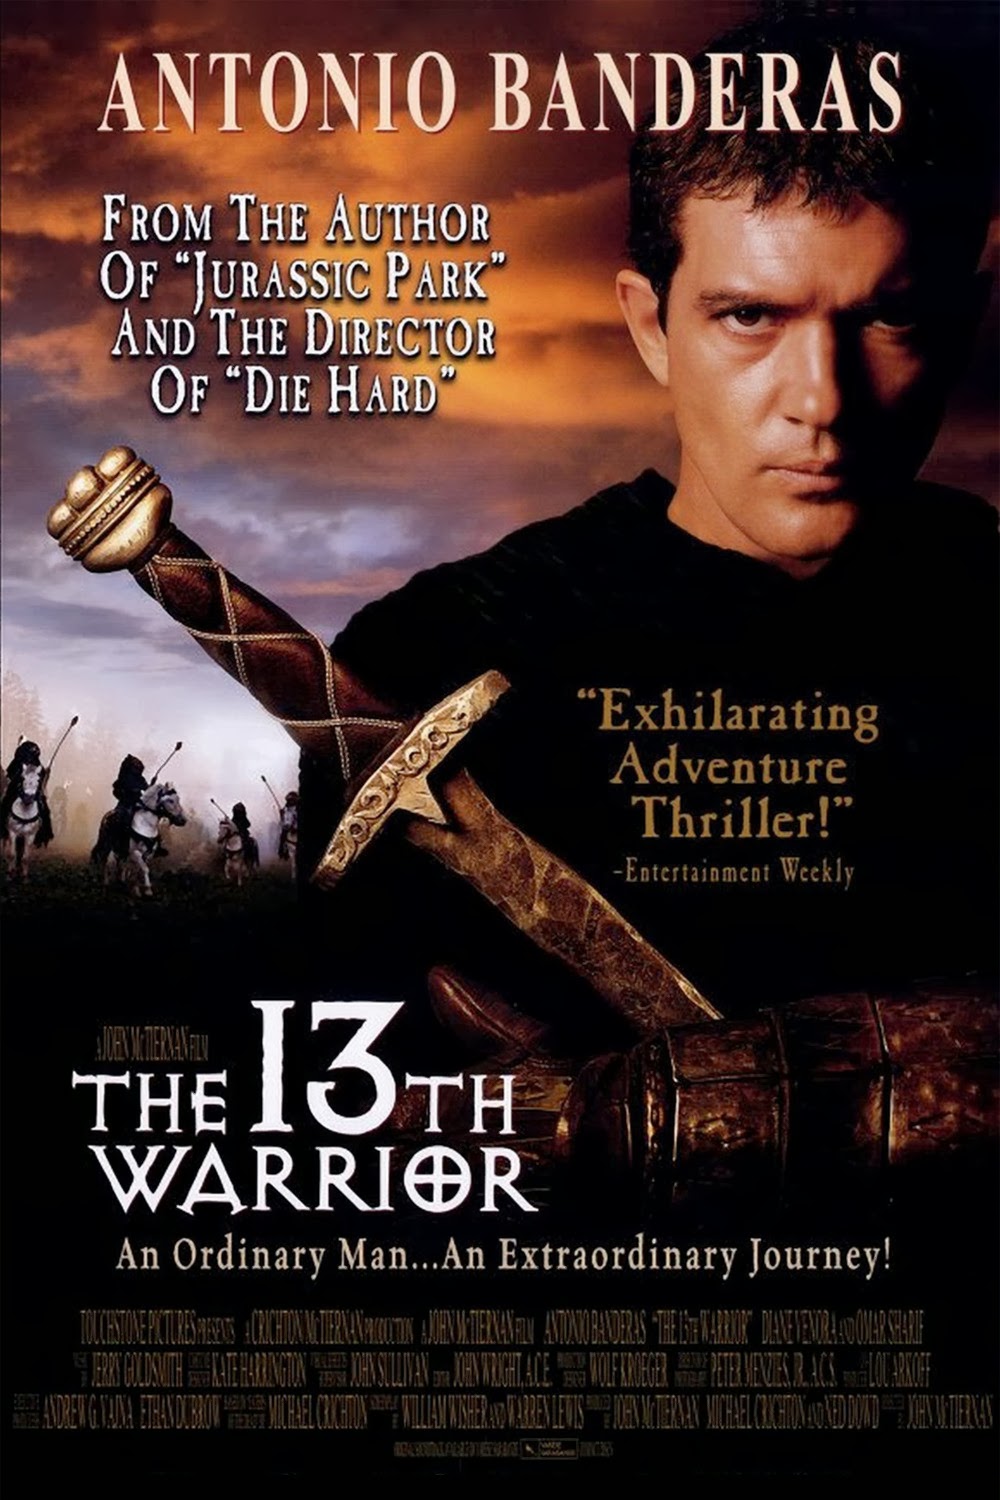 FULL MOVIE: The 13th Warrior (1999)